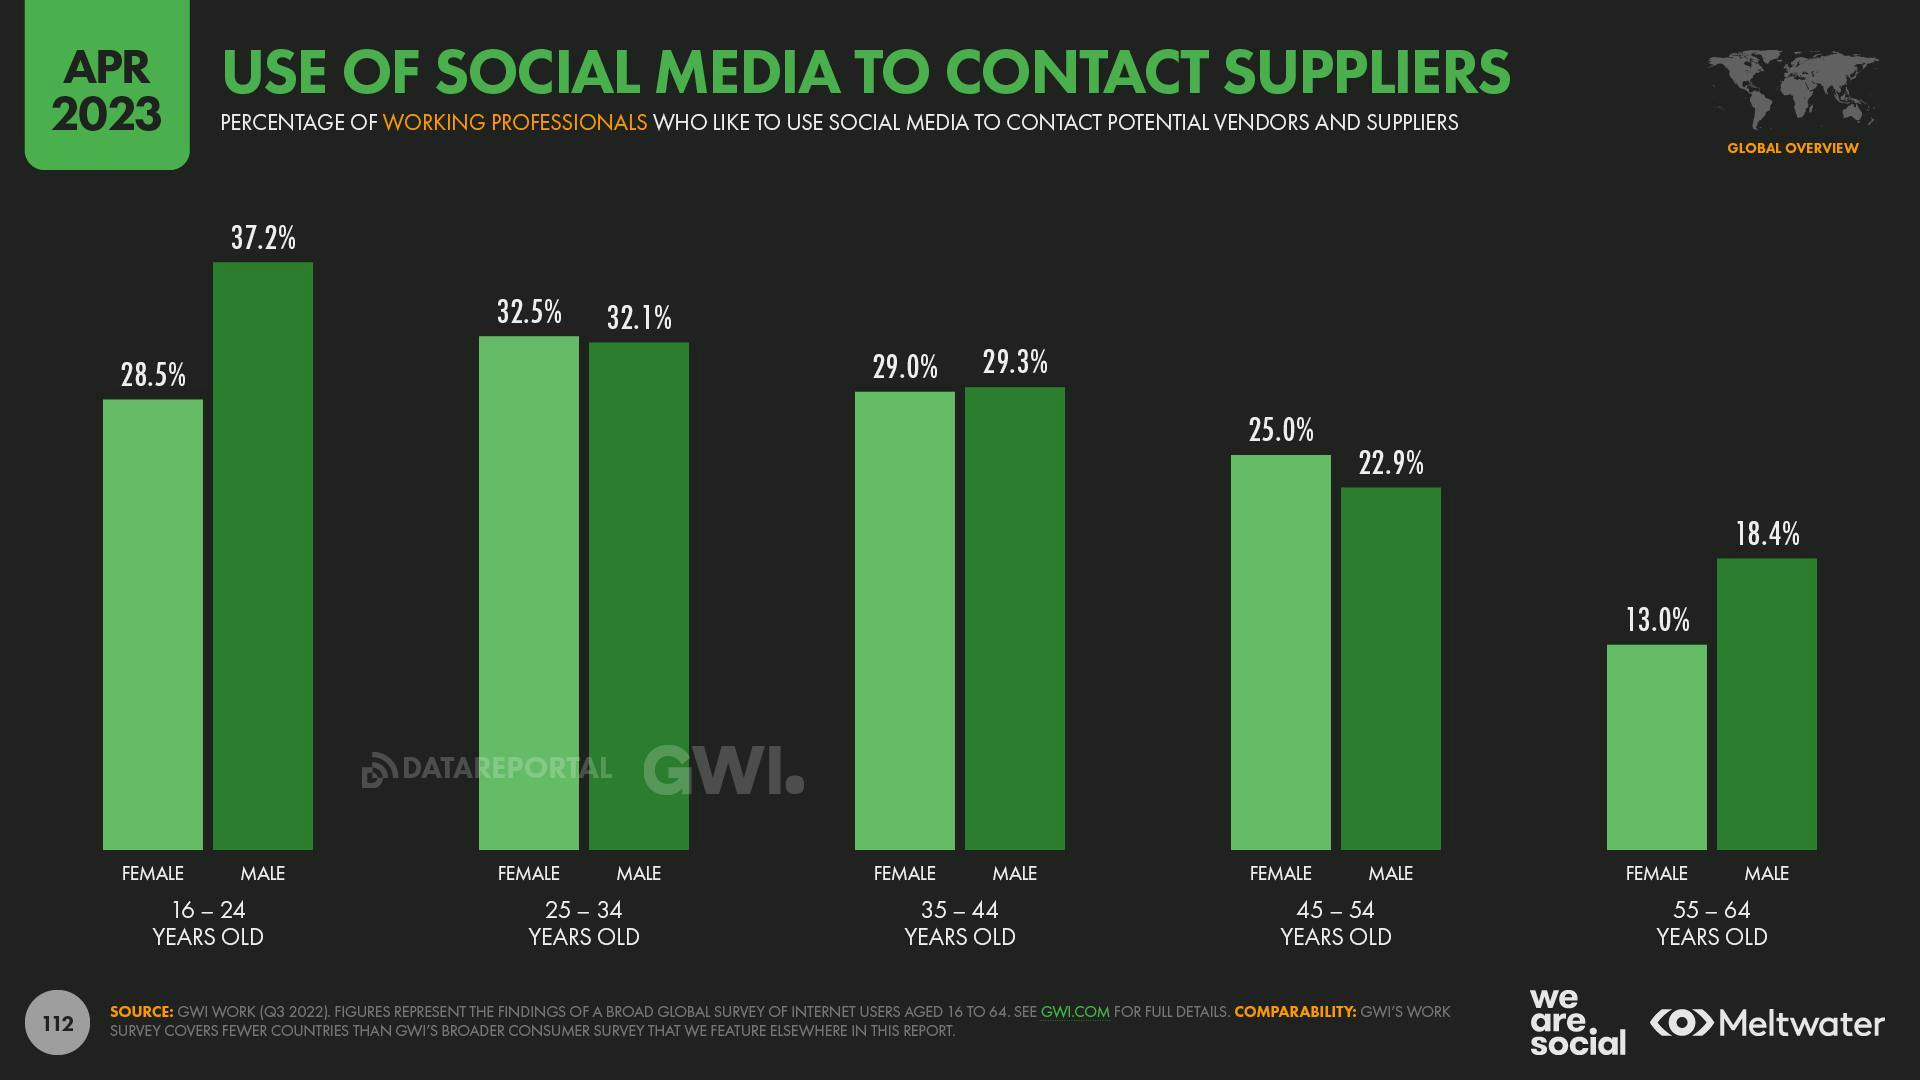 April 2023 Global State of Digital Report: Use of Social Media to Contact Suppliers